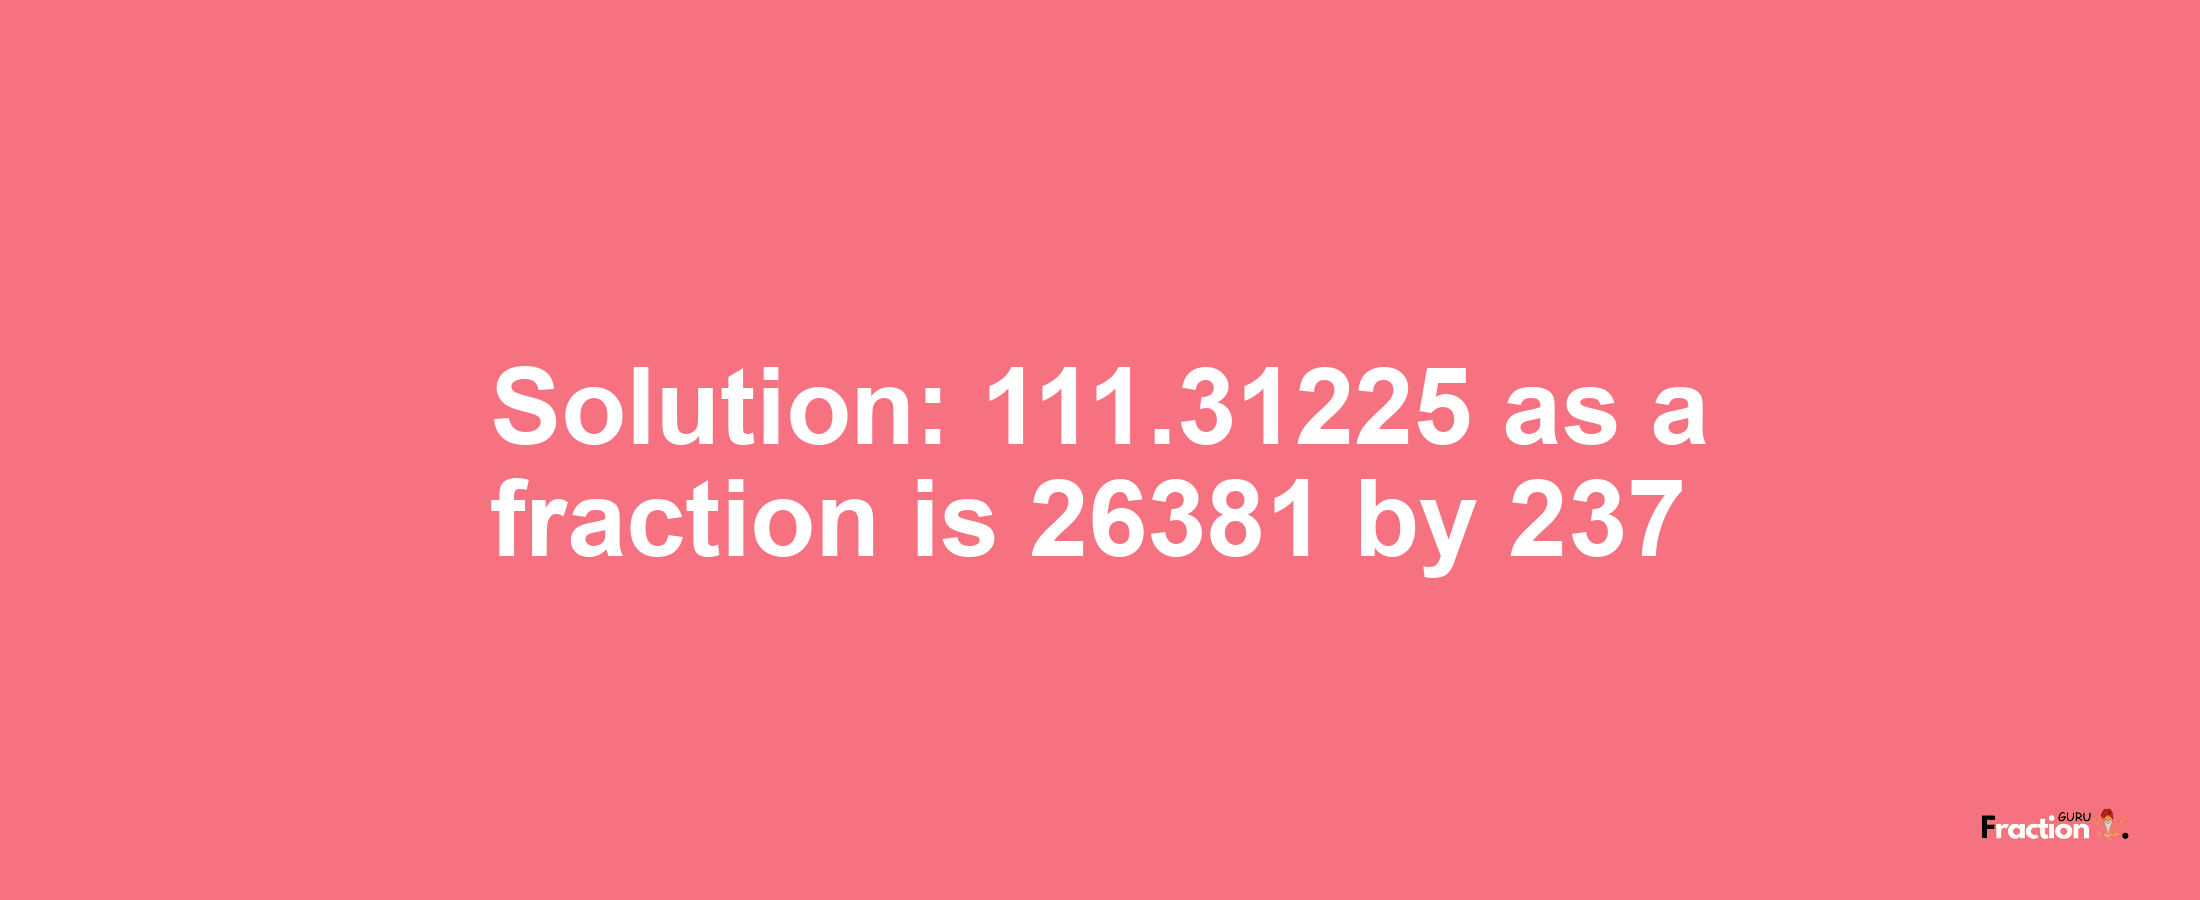 Solution:111.31225 as a fraction is 26381/237